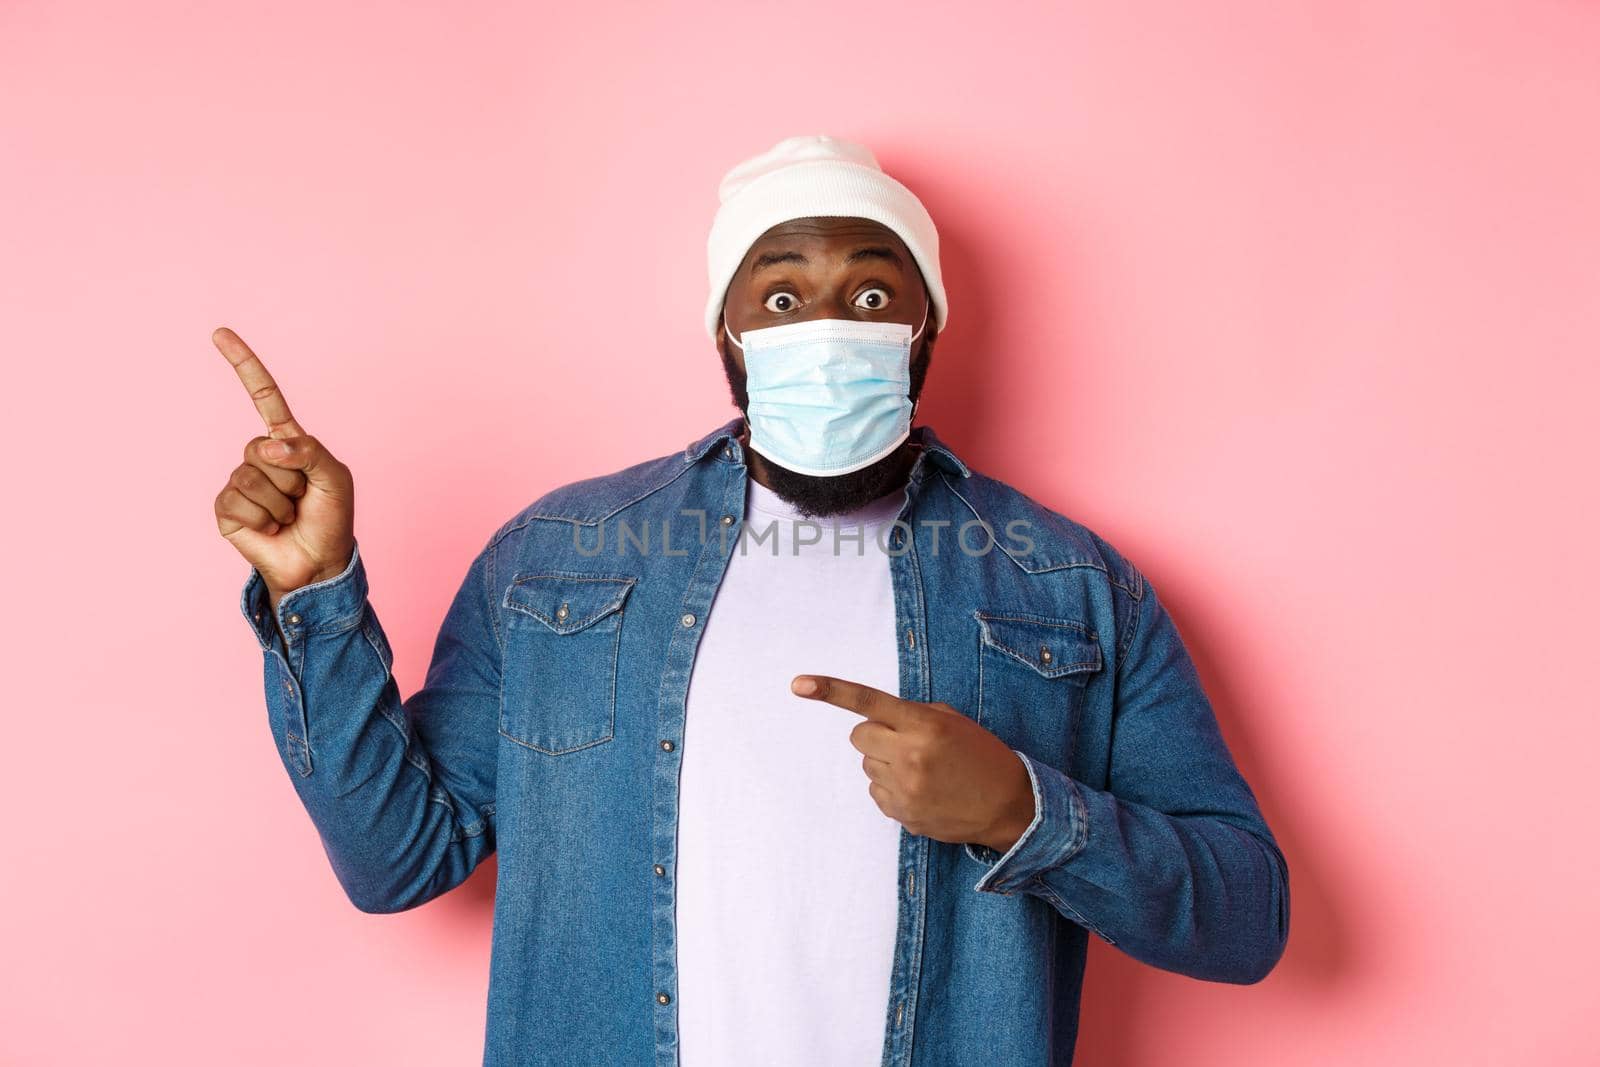 Coronavirus, lifestyle and global pandemic concept. Amazed black man in face mask showing advertisement, pointing at upper left corner and look excited, pink background.